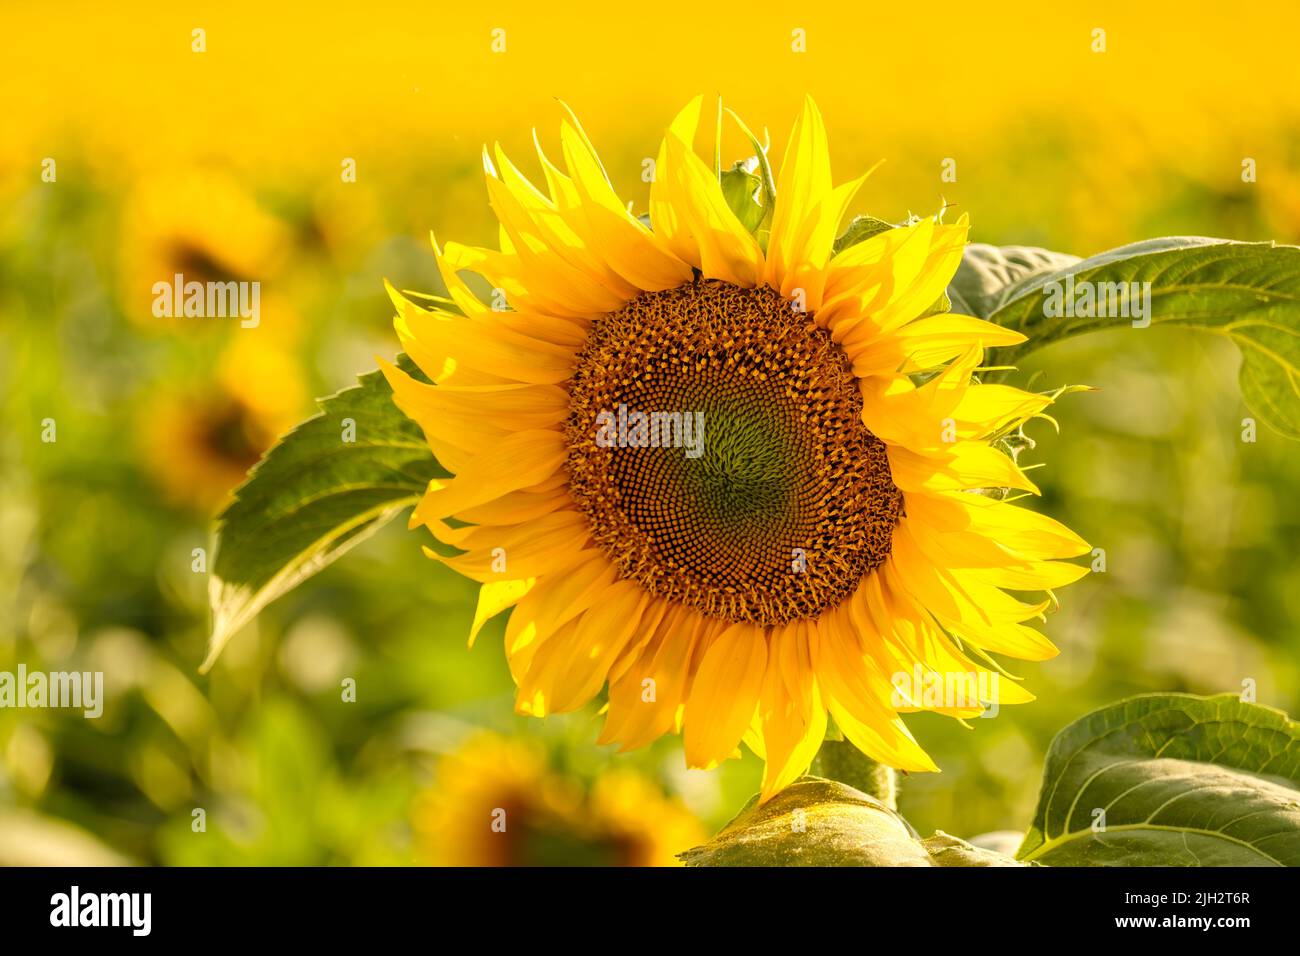 Bright sunflower with yellow petals and green leaves grows in rural field on blurred background. Agriculture in countryside close view Stock Photo